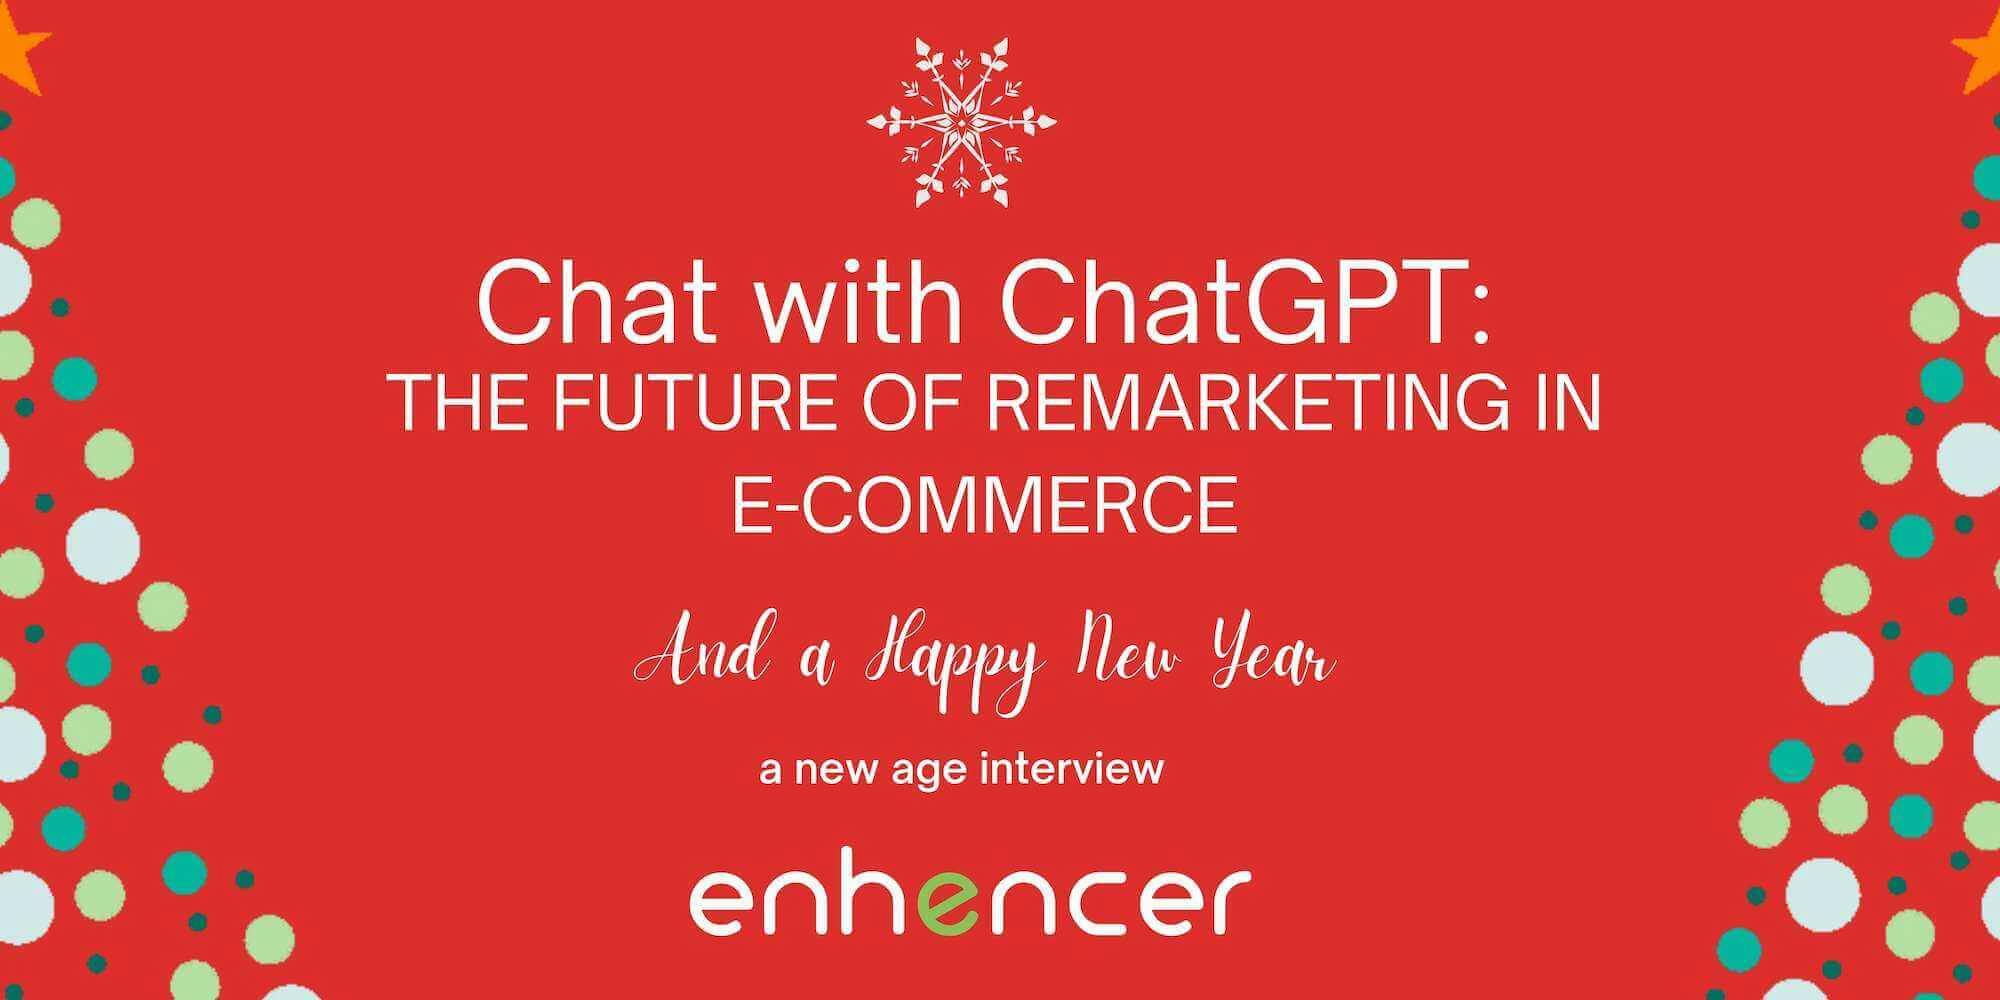 Chat with ChatGPT: The Future of Remarketing in E-commerce